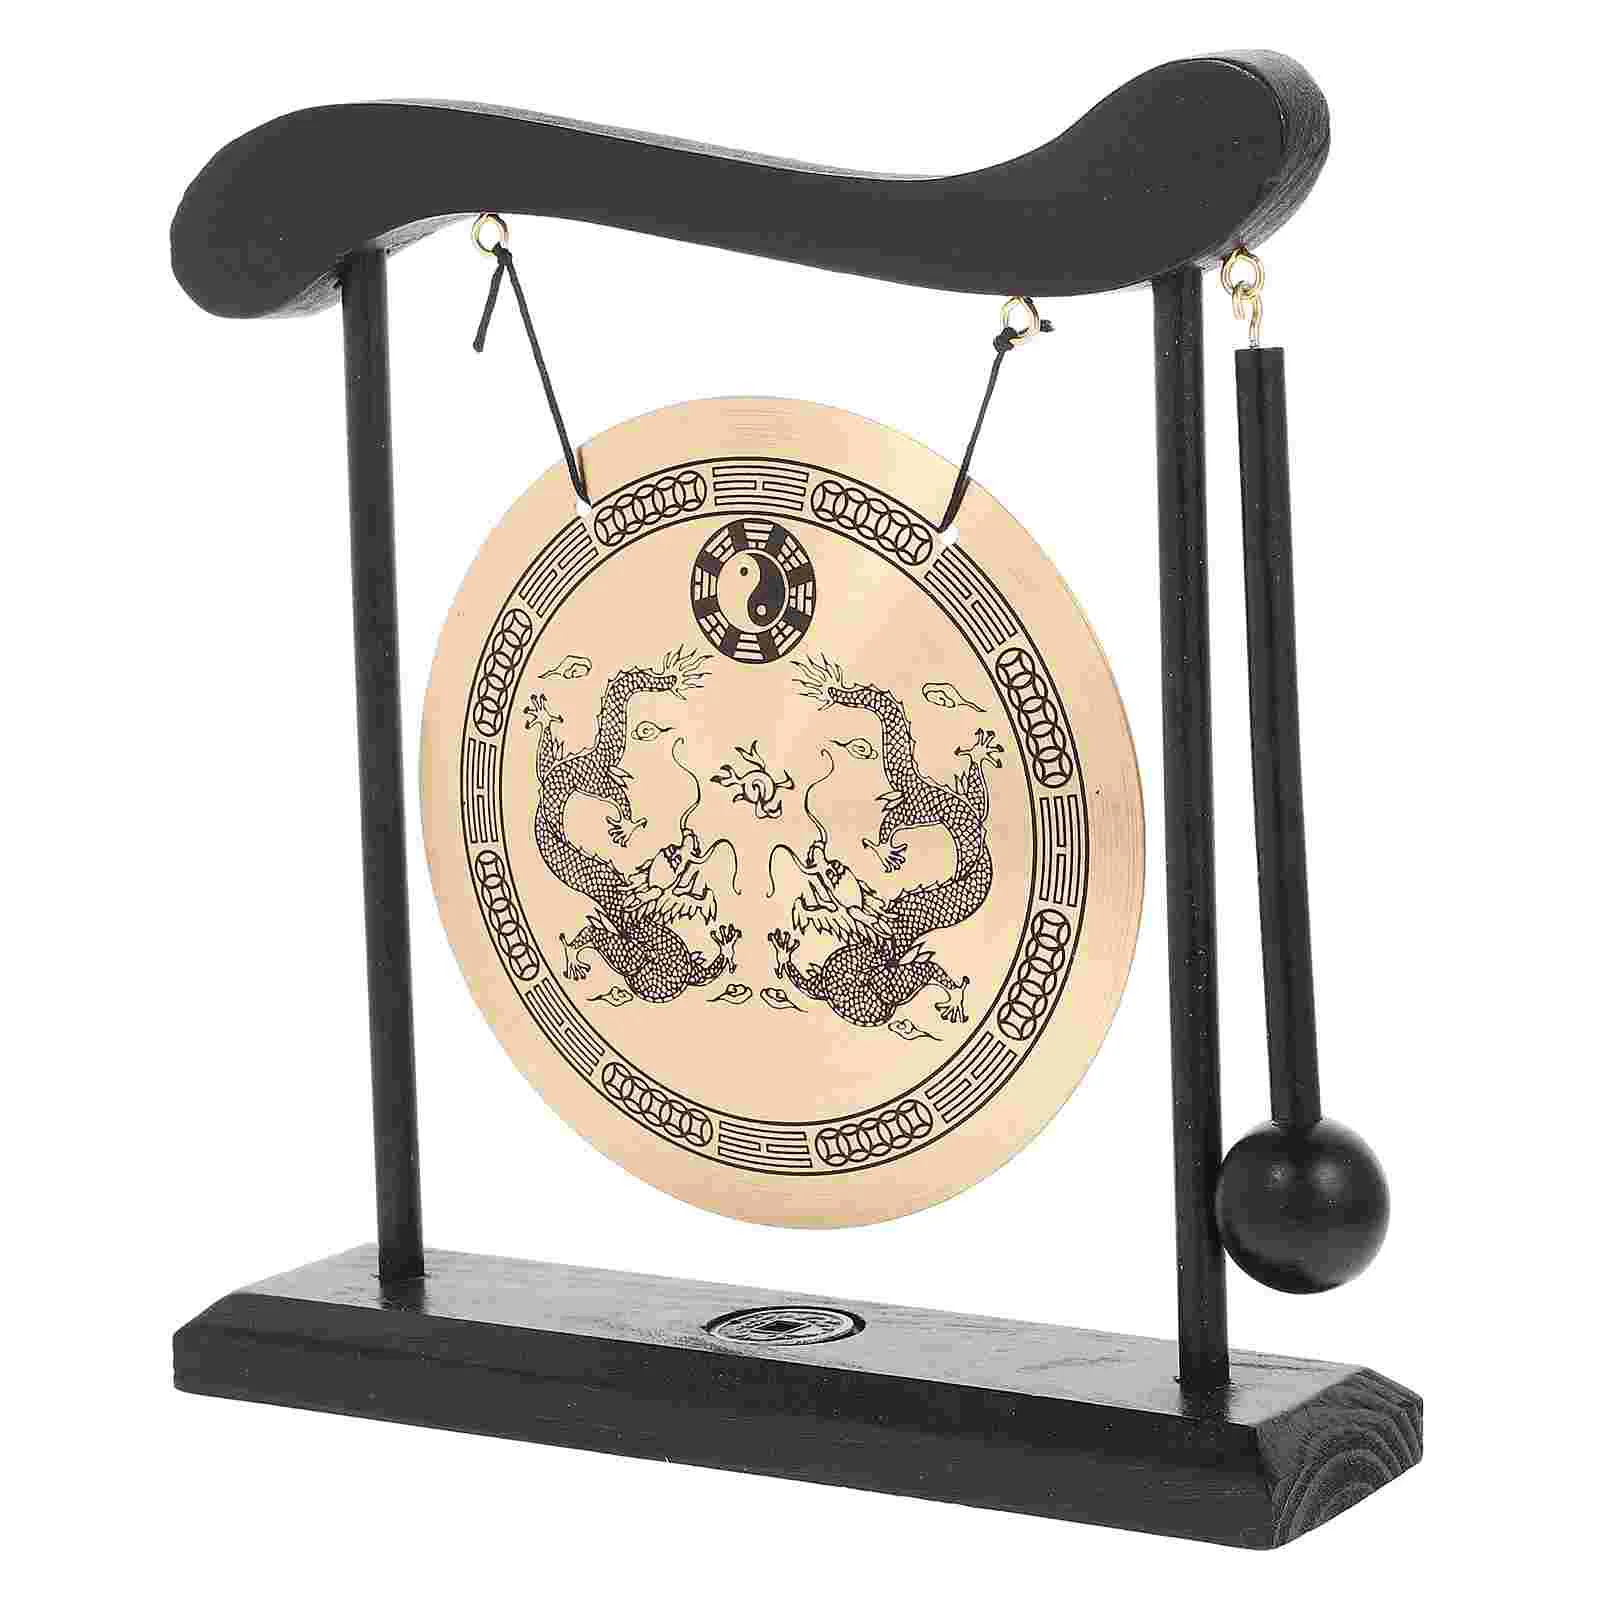 

Gong Asian Decor Chinese Table Desk Office Small Living Room Decorations for Home Alloy Desktop Bell with Stand